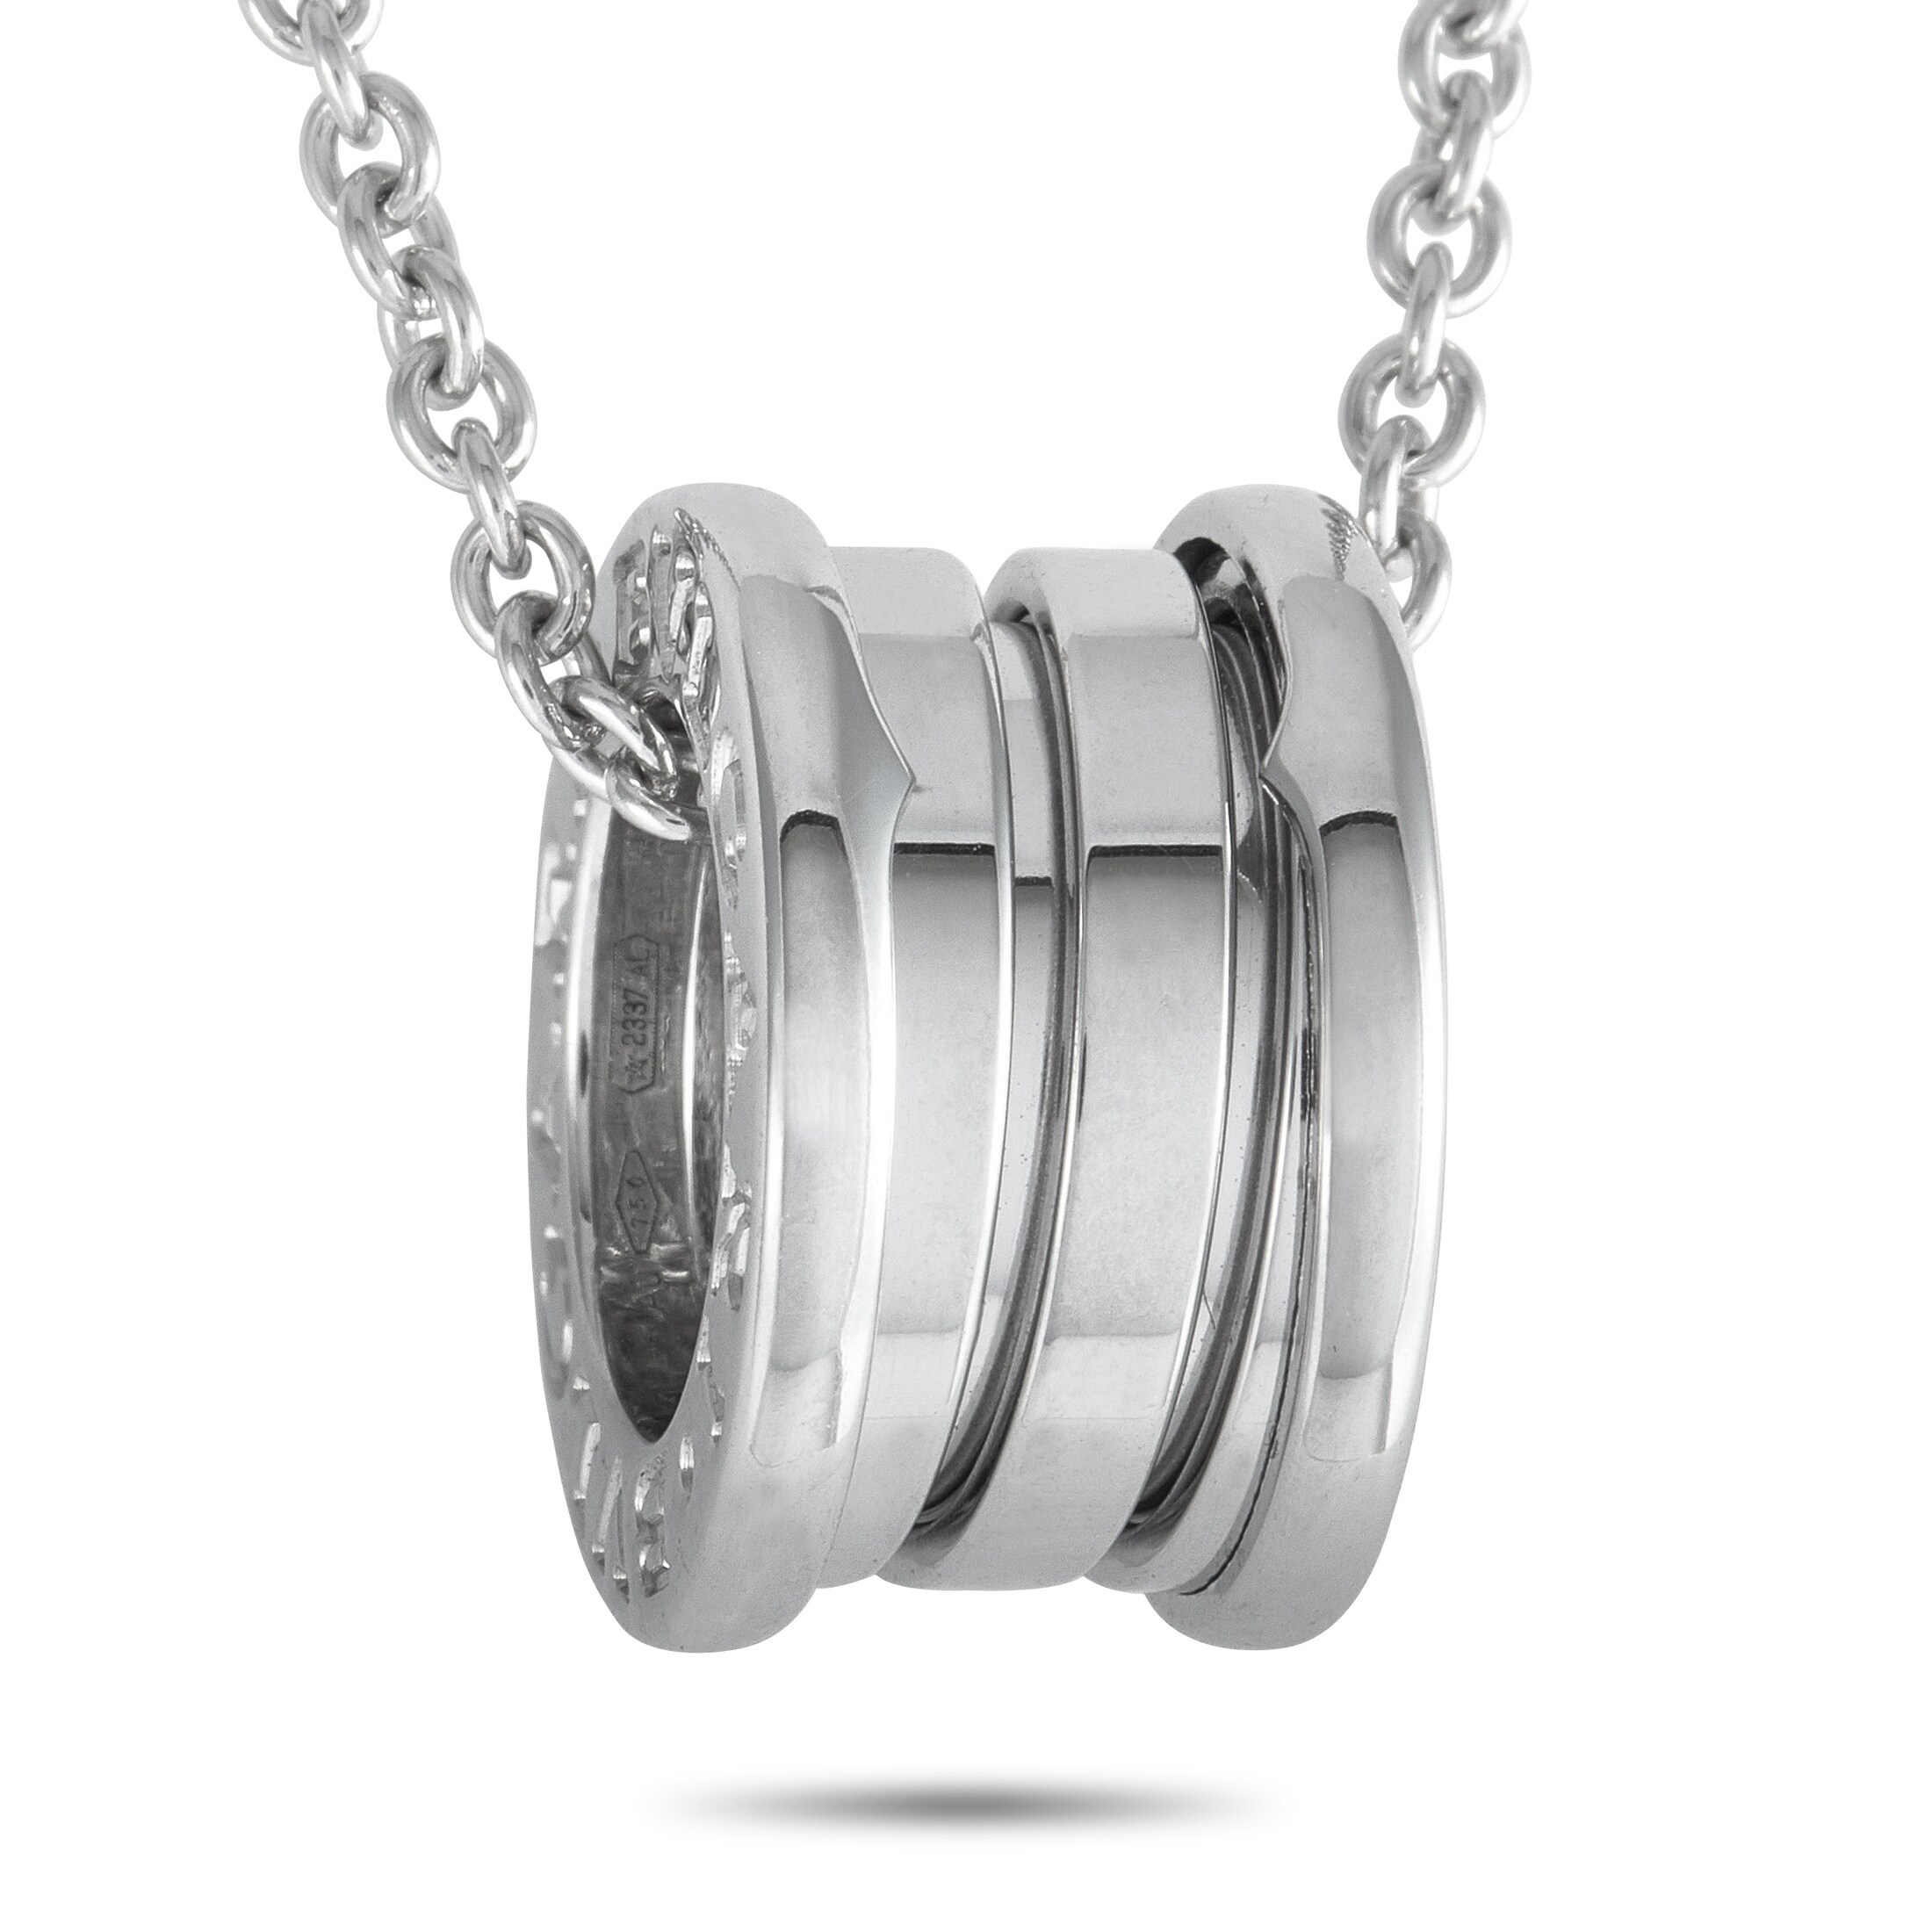 Shop Bvlgari B Zero1 White Gold 3 Band Ring Pendant Necklace Length N A On Sale Overstock